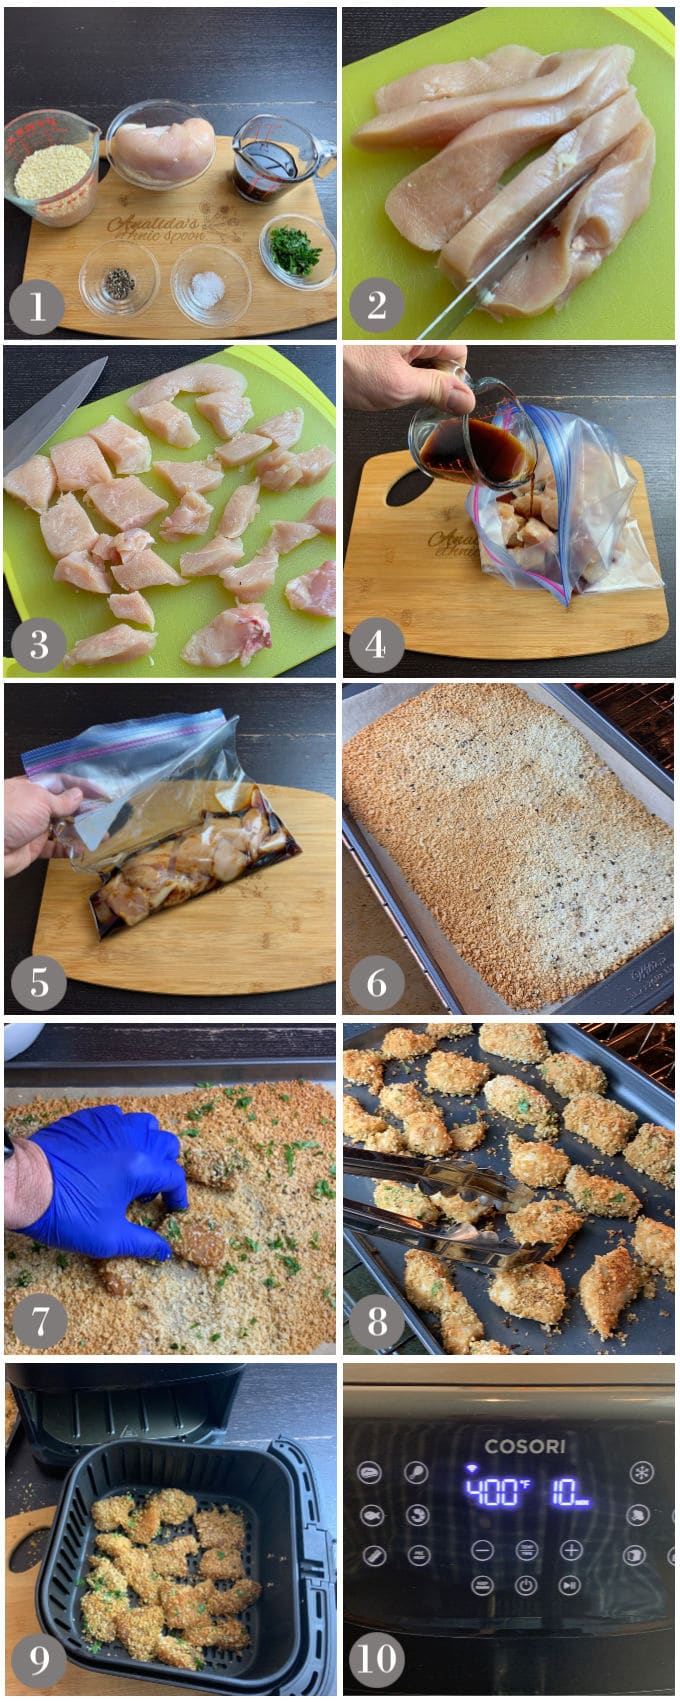 A collage of photos showing the ingredients and steps to make homemade chicken tenders.